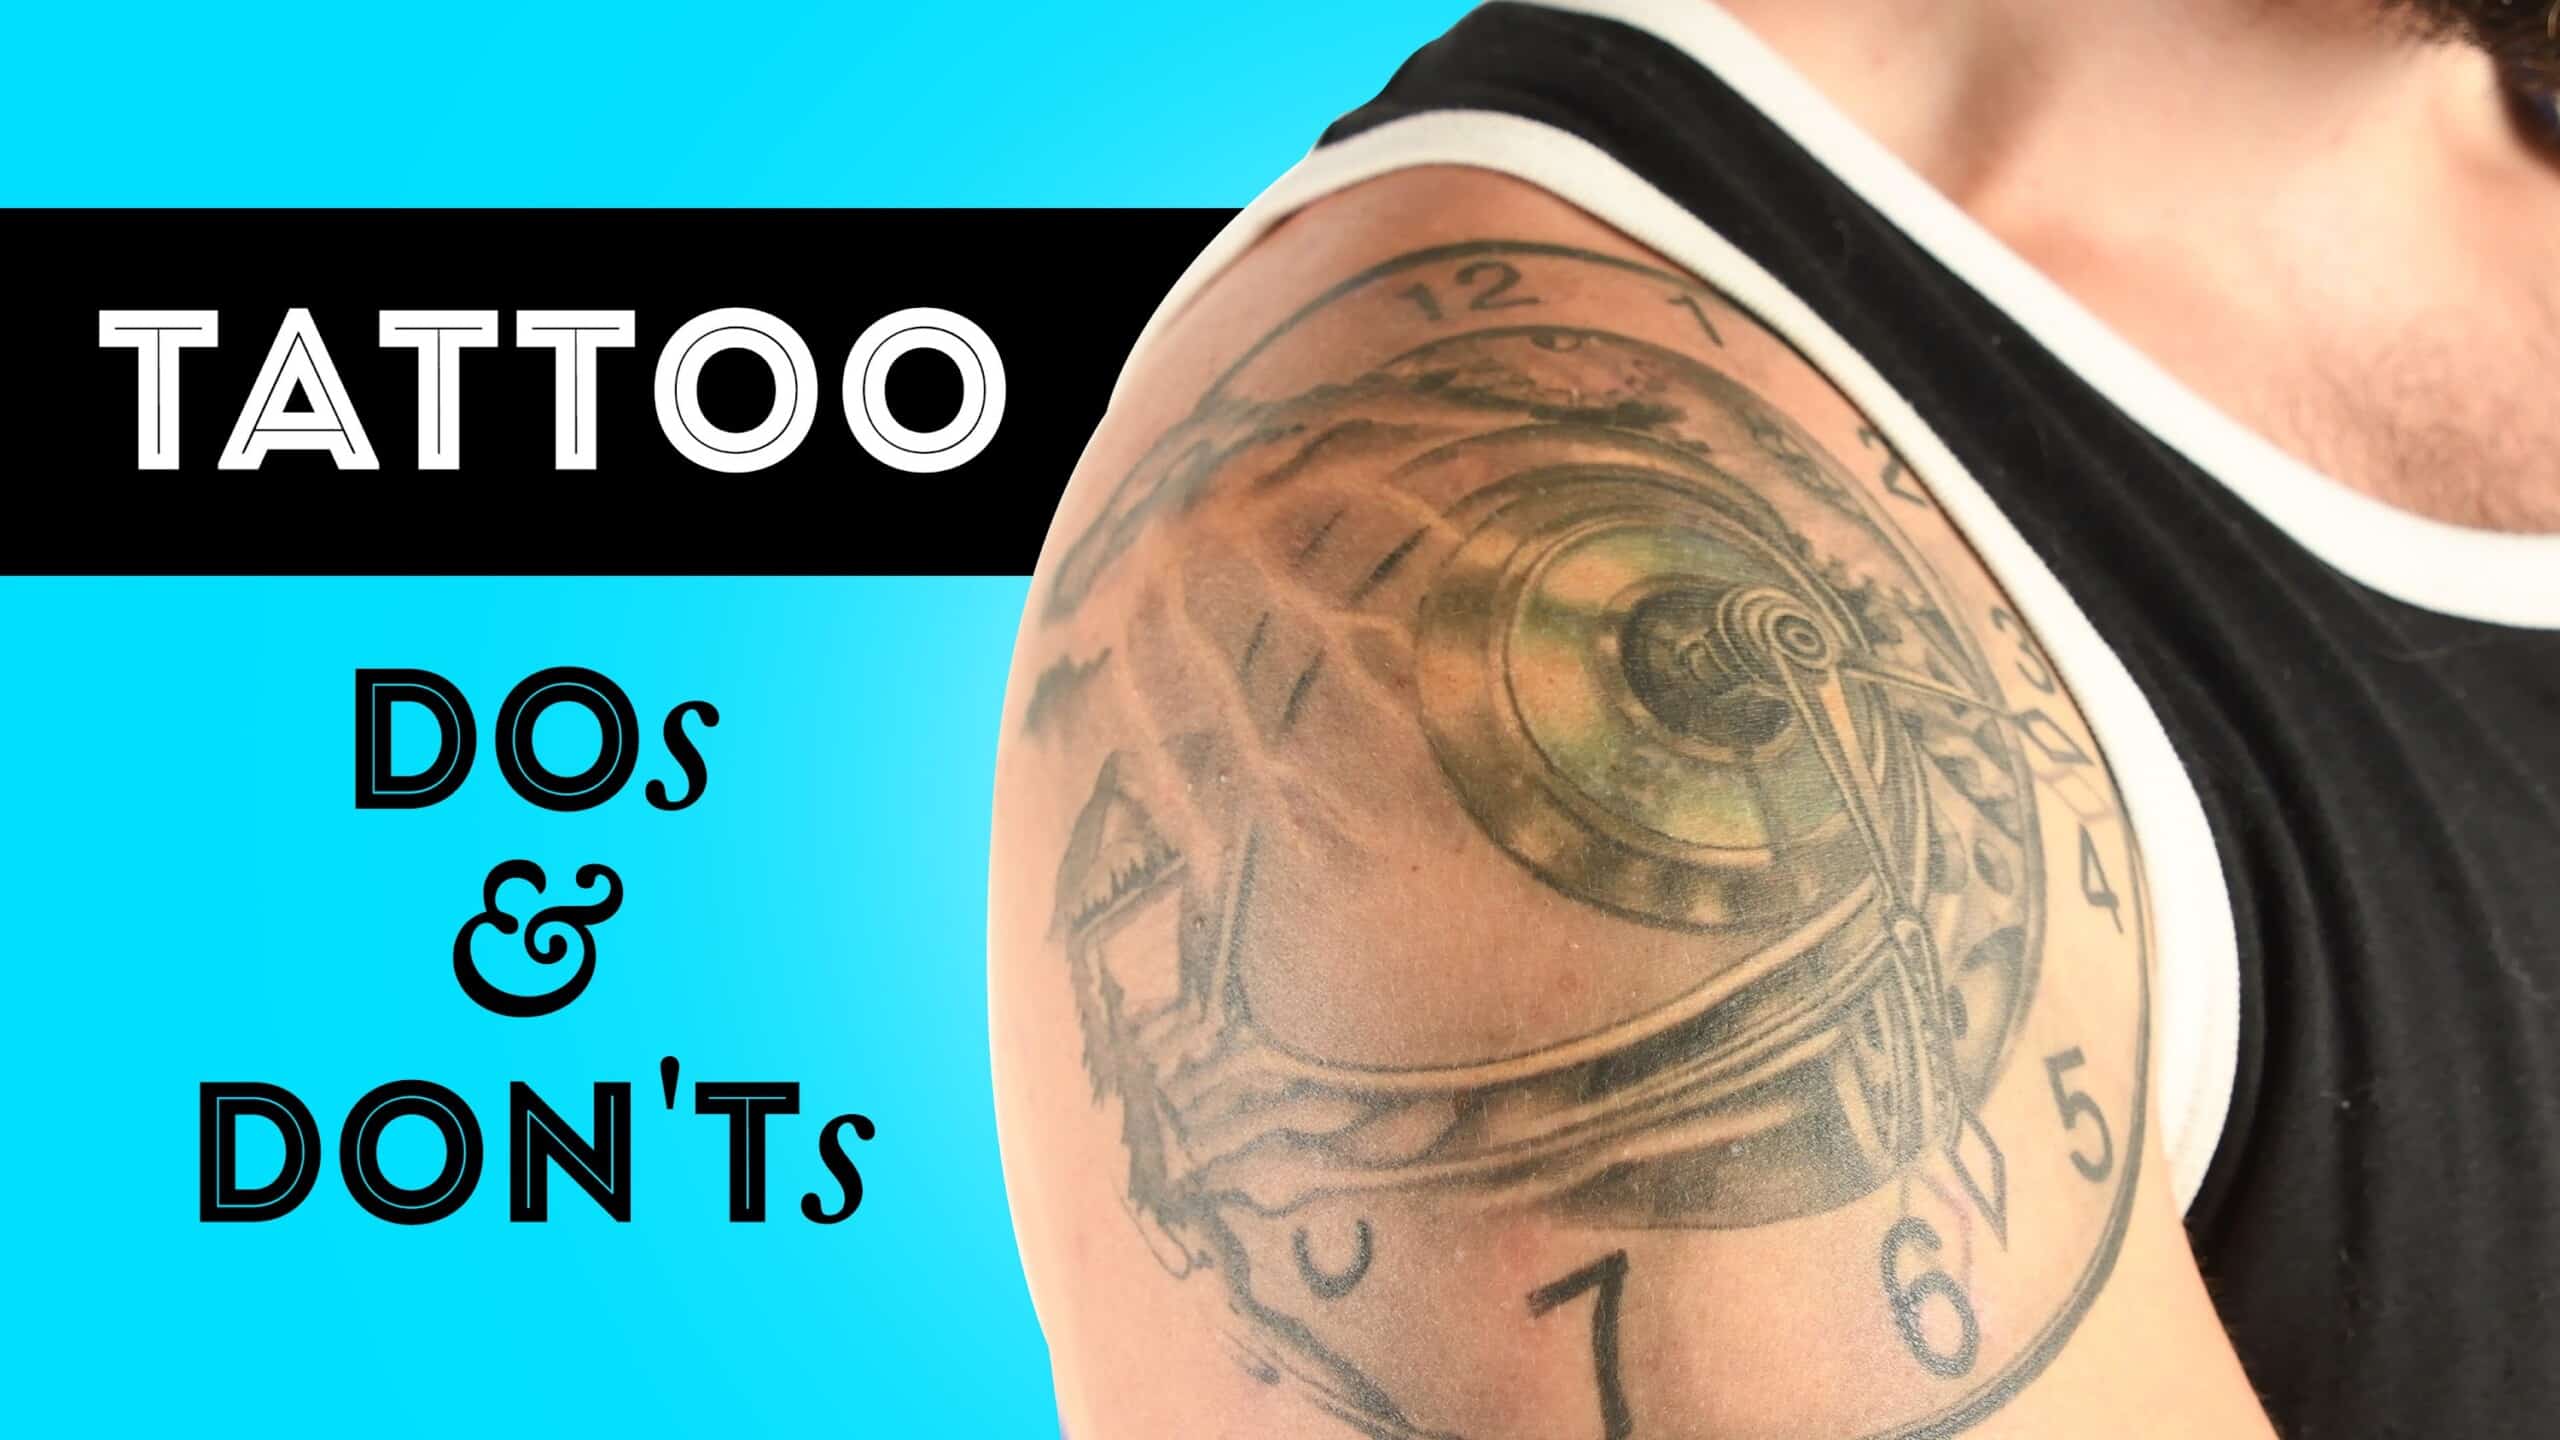 Tattoo Dos And Don'ts